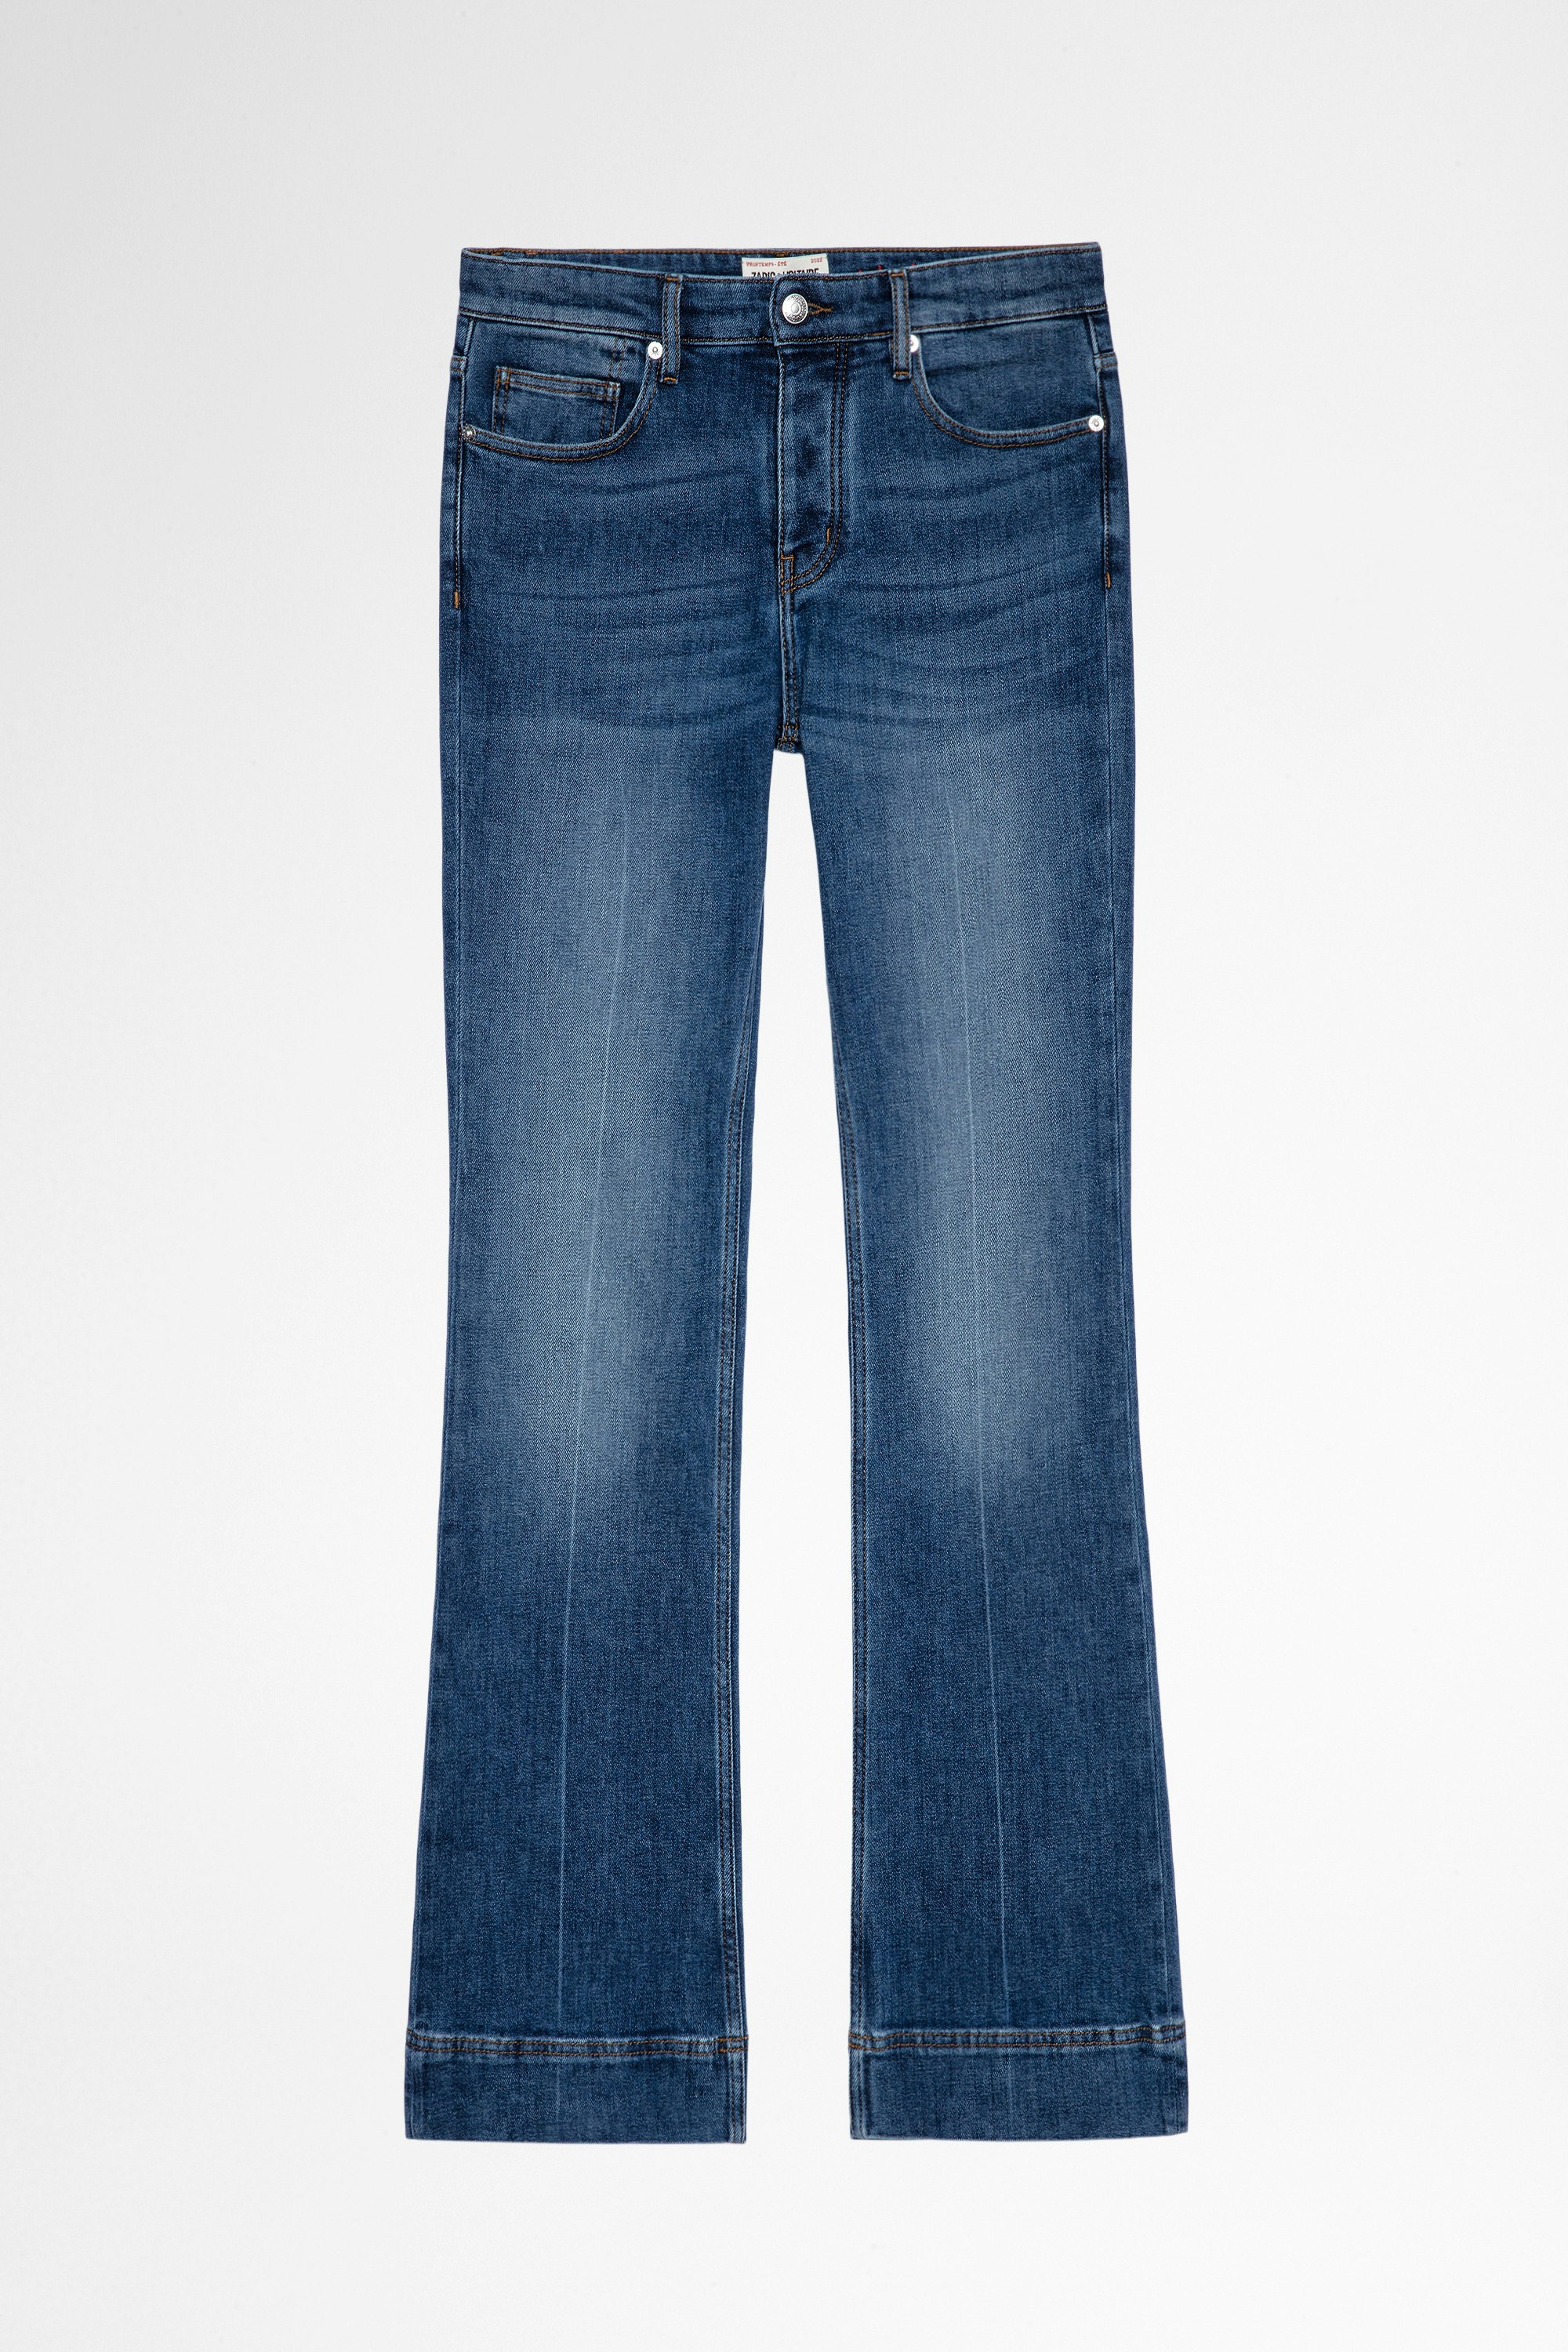 Vincente ジンズ Women's faded blue denim flare-leg jeans. Made with recycled fibers